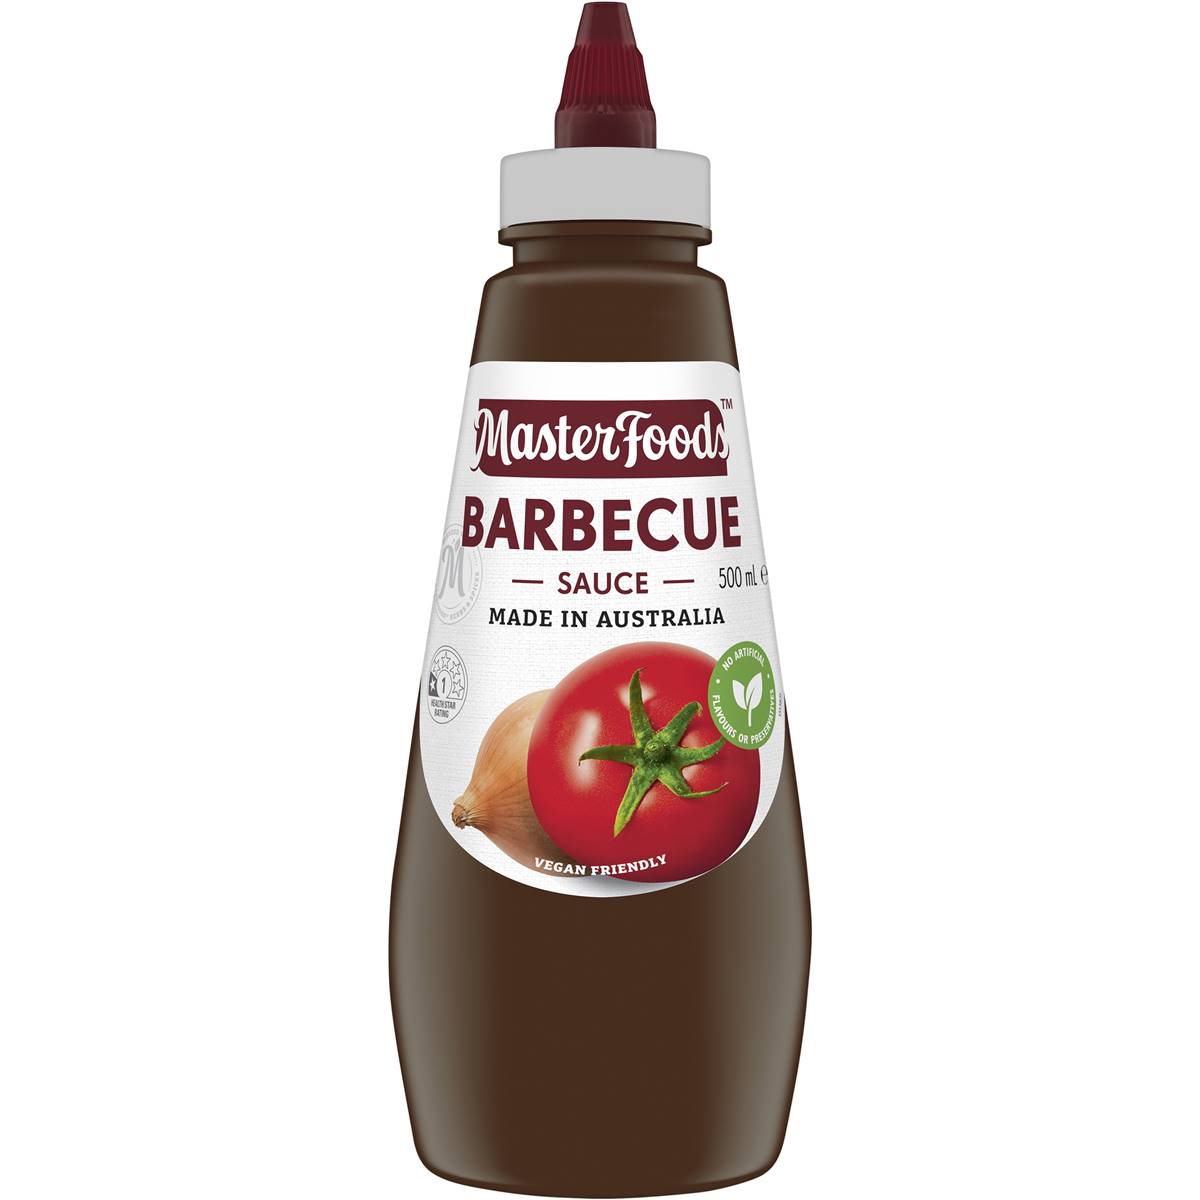 Masterfoods Barbecue Sauce 500ml | Woolworths